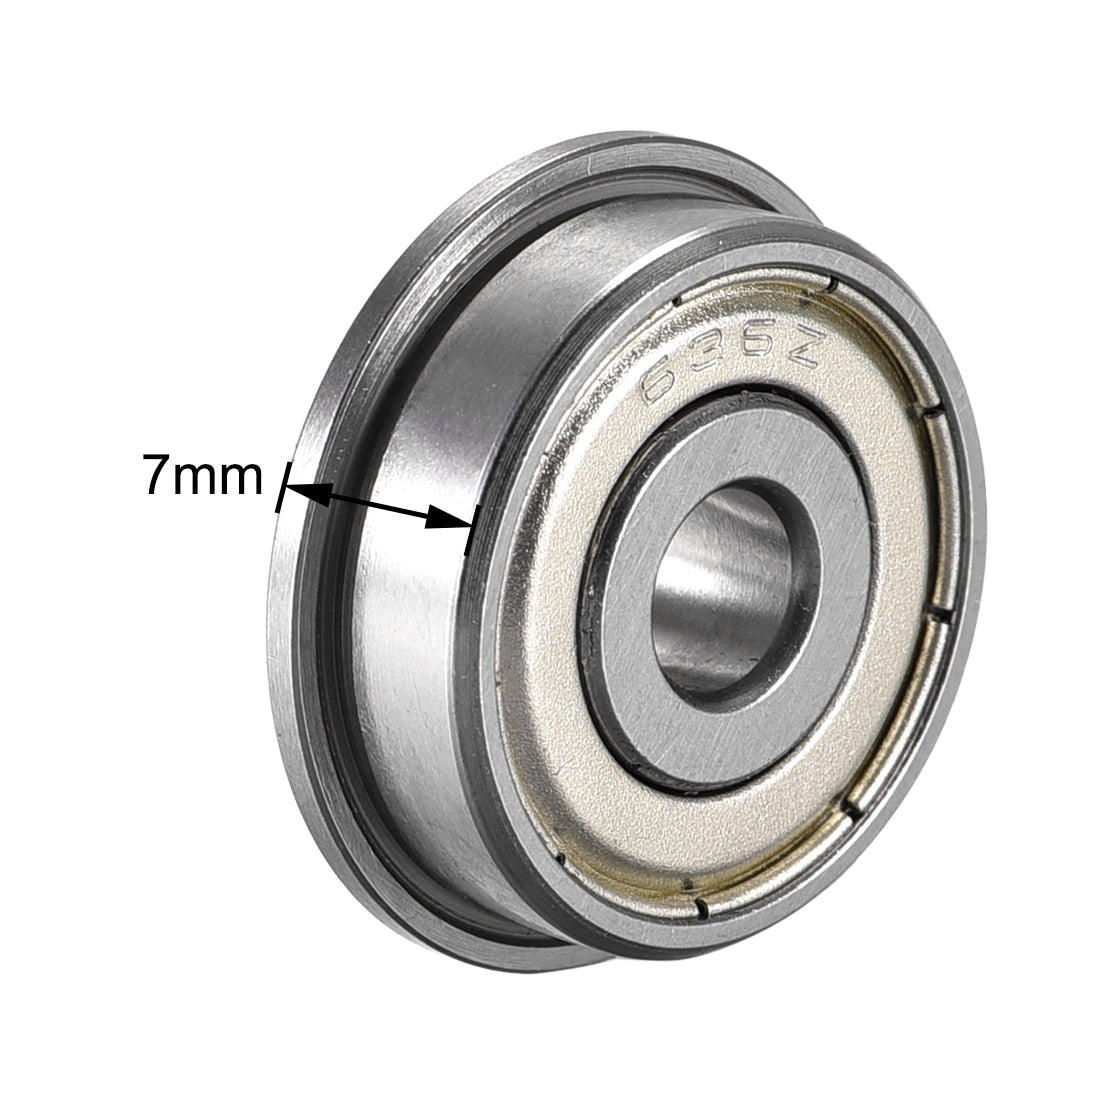 uxcell Uxcell F636ZZ Flange Ball Bearing 6x22x7mm Double Shielded Chrome Steel Bearings 4pcs